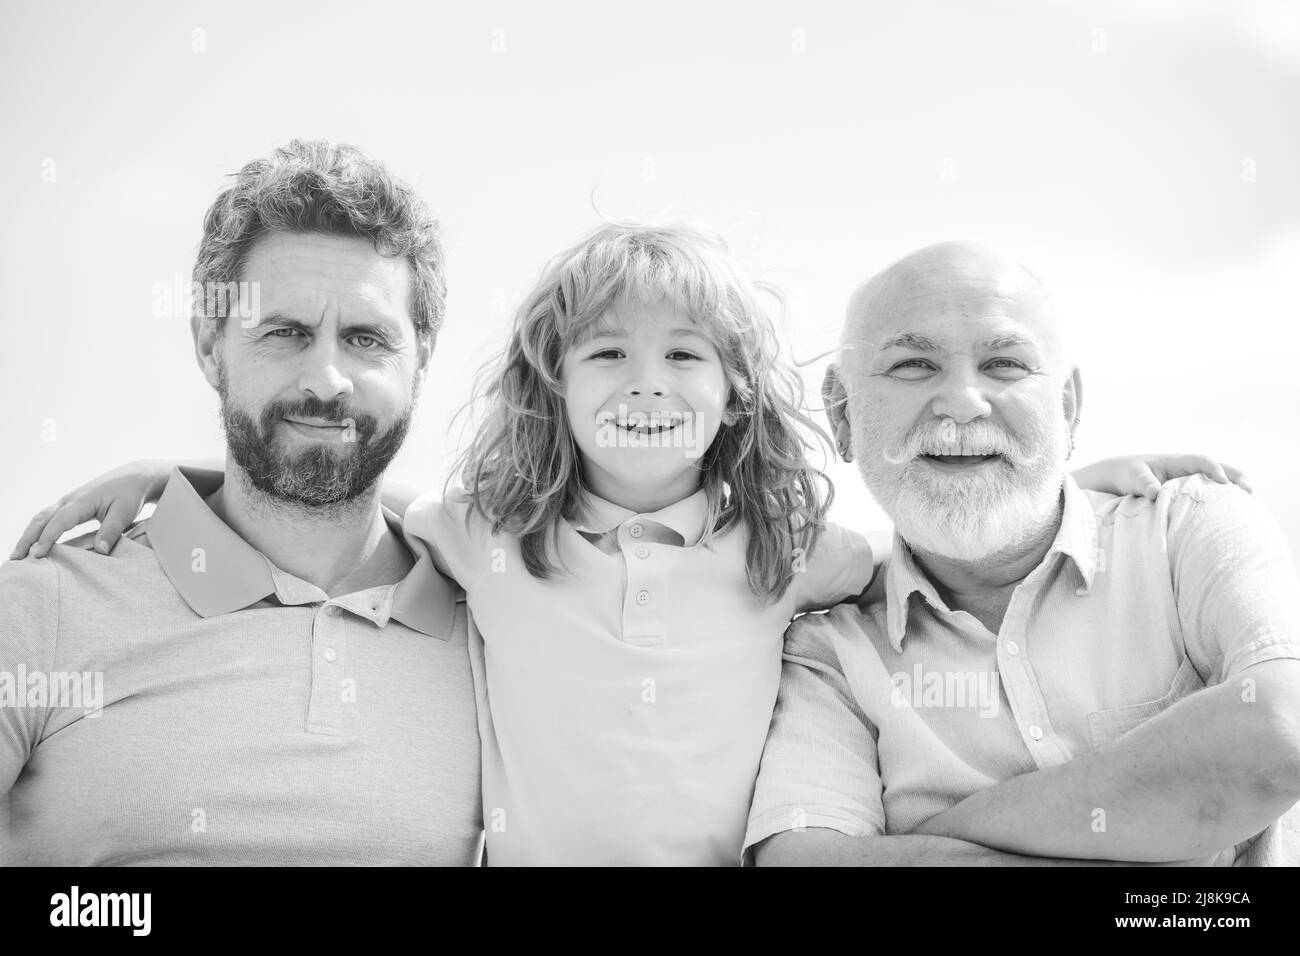 Men generation portrait of grandfather father and son child. Fathers day. Men in different ages. Stock Photo